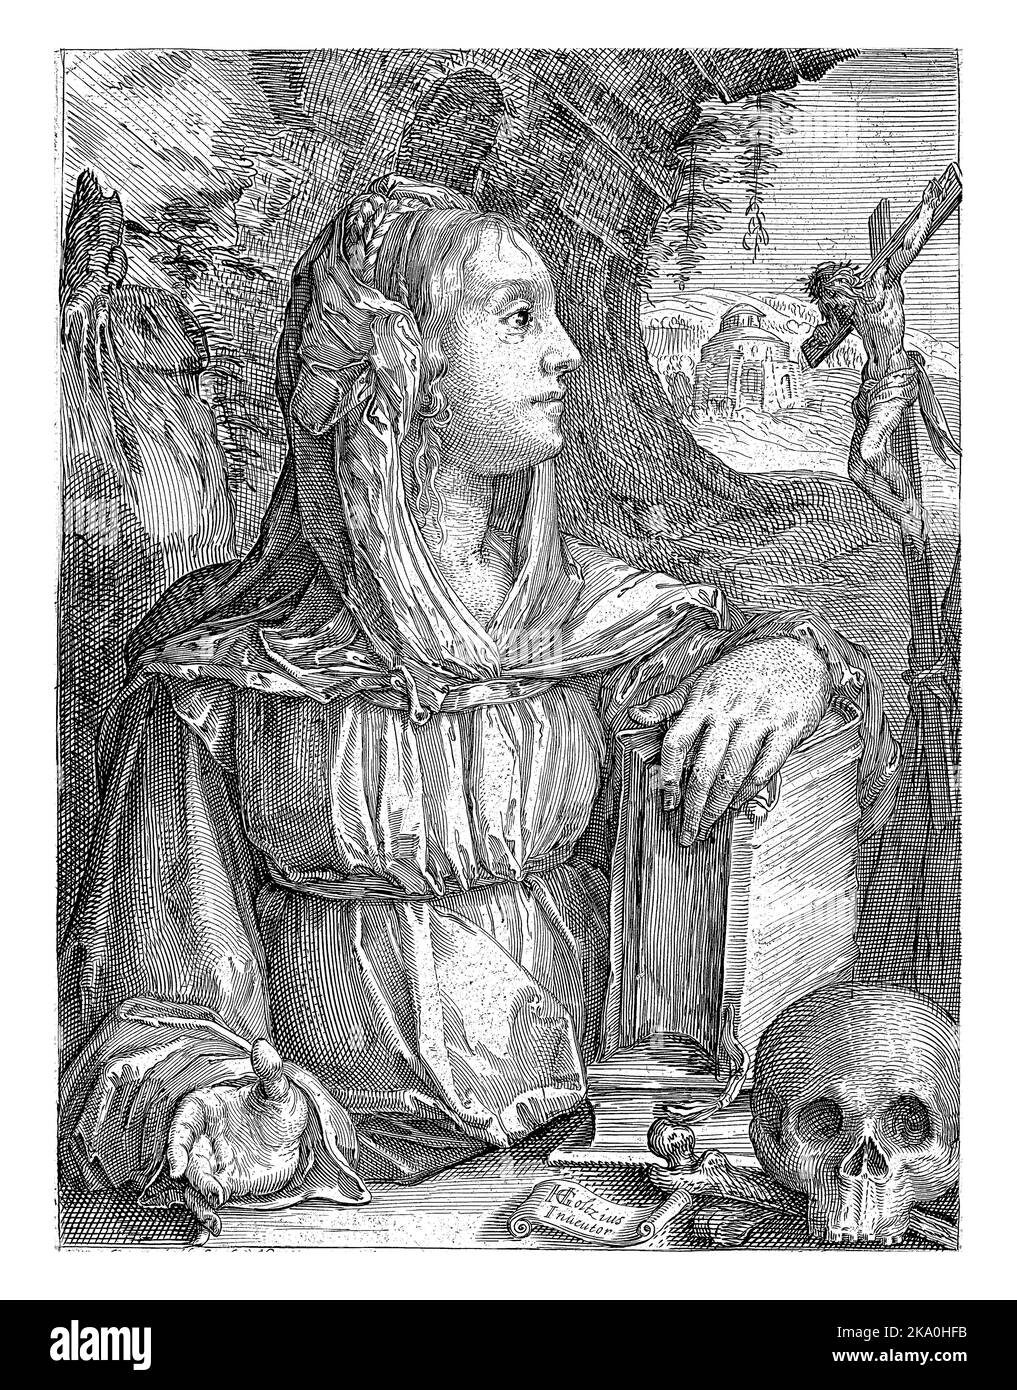 Penitent Mary Magdalene, in profile, looking at a crucifix next to her, her hand resting on a bible. A skull for her. Stock Photo